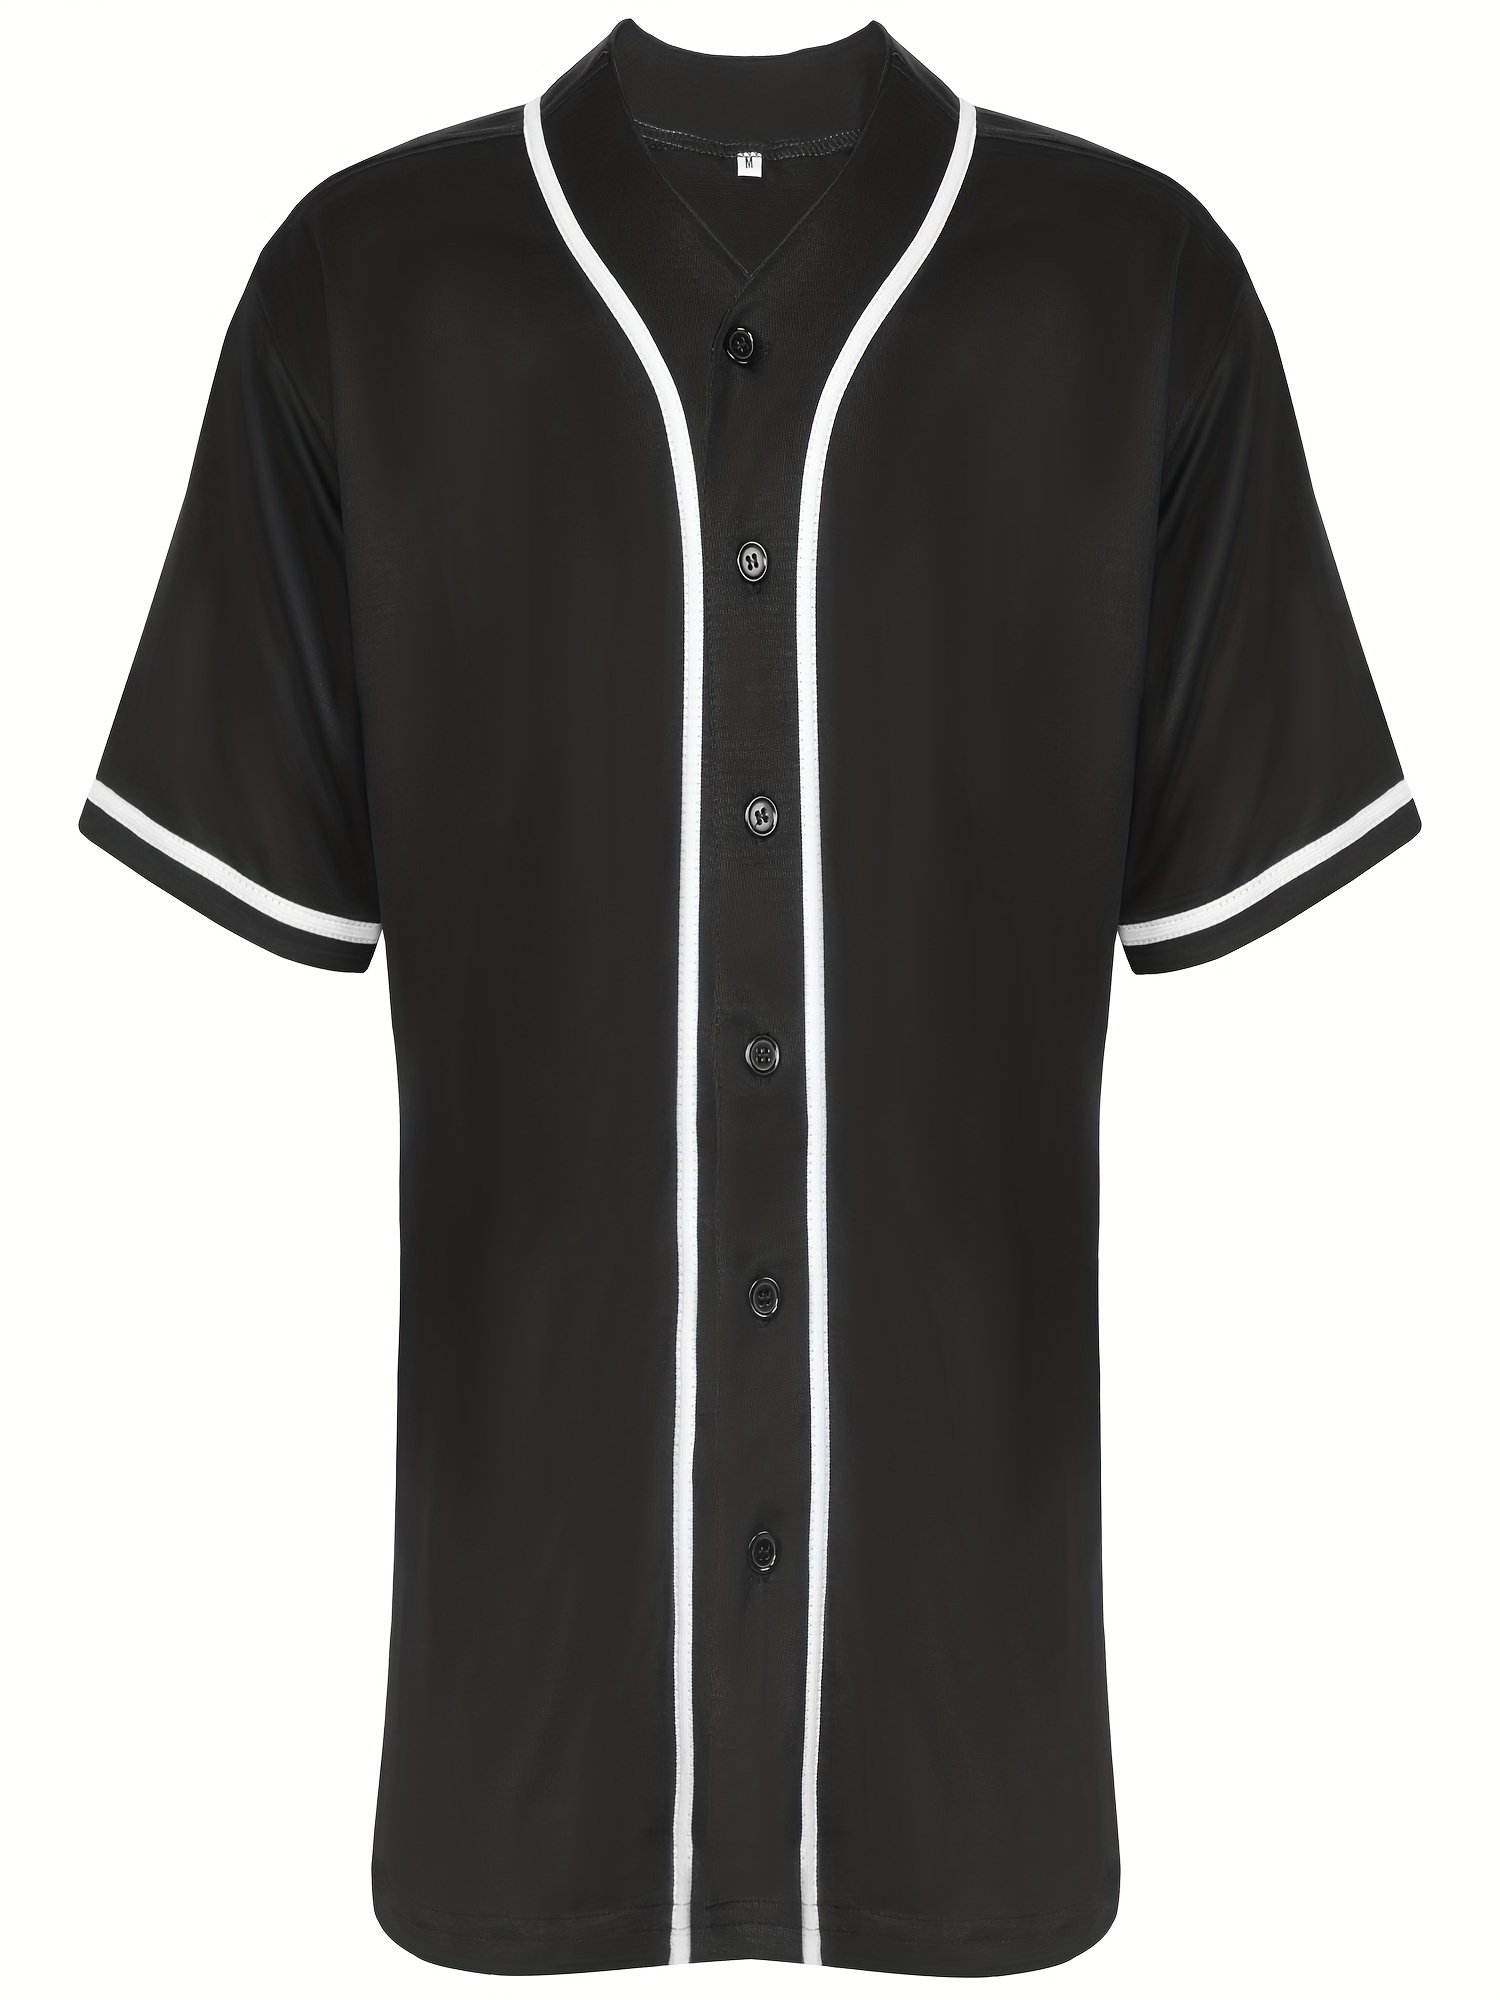 Mens Solid Baseball Jersey, Casual Button Up Short Sleeve Sports Uniform Hip Hop Shirt,Breathable, Quick Dry,Temu